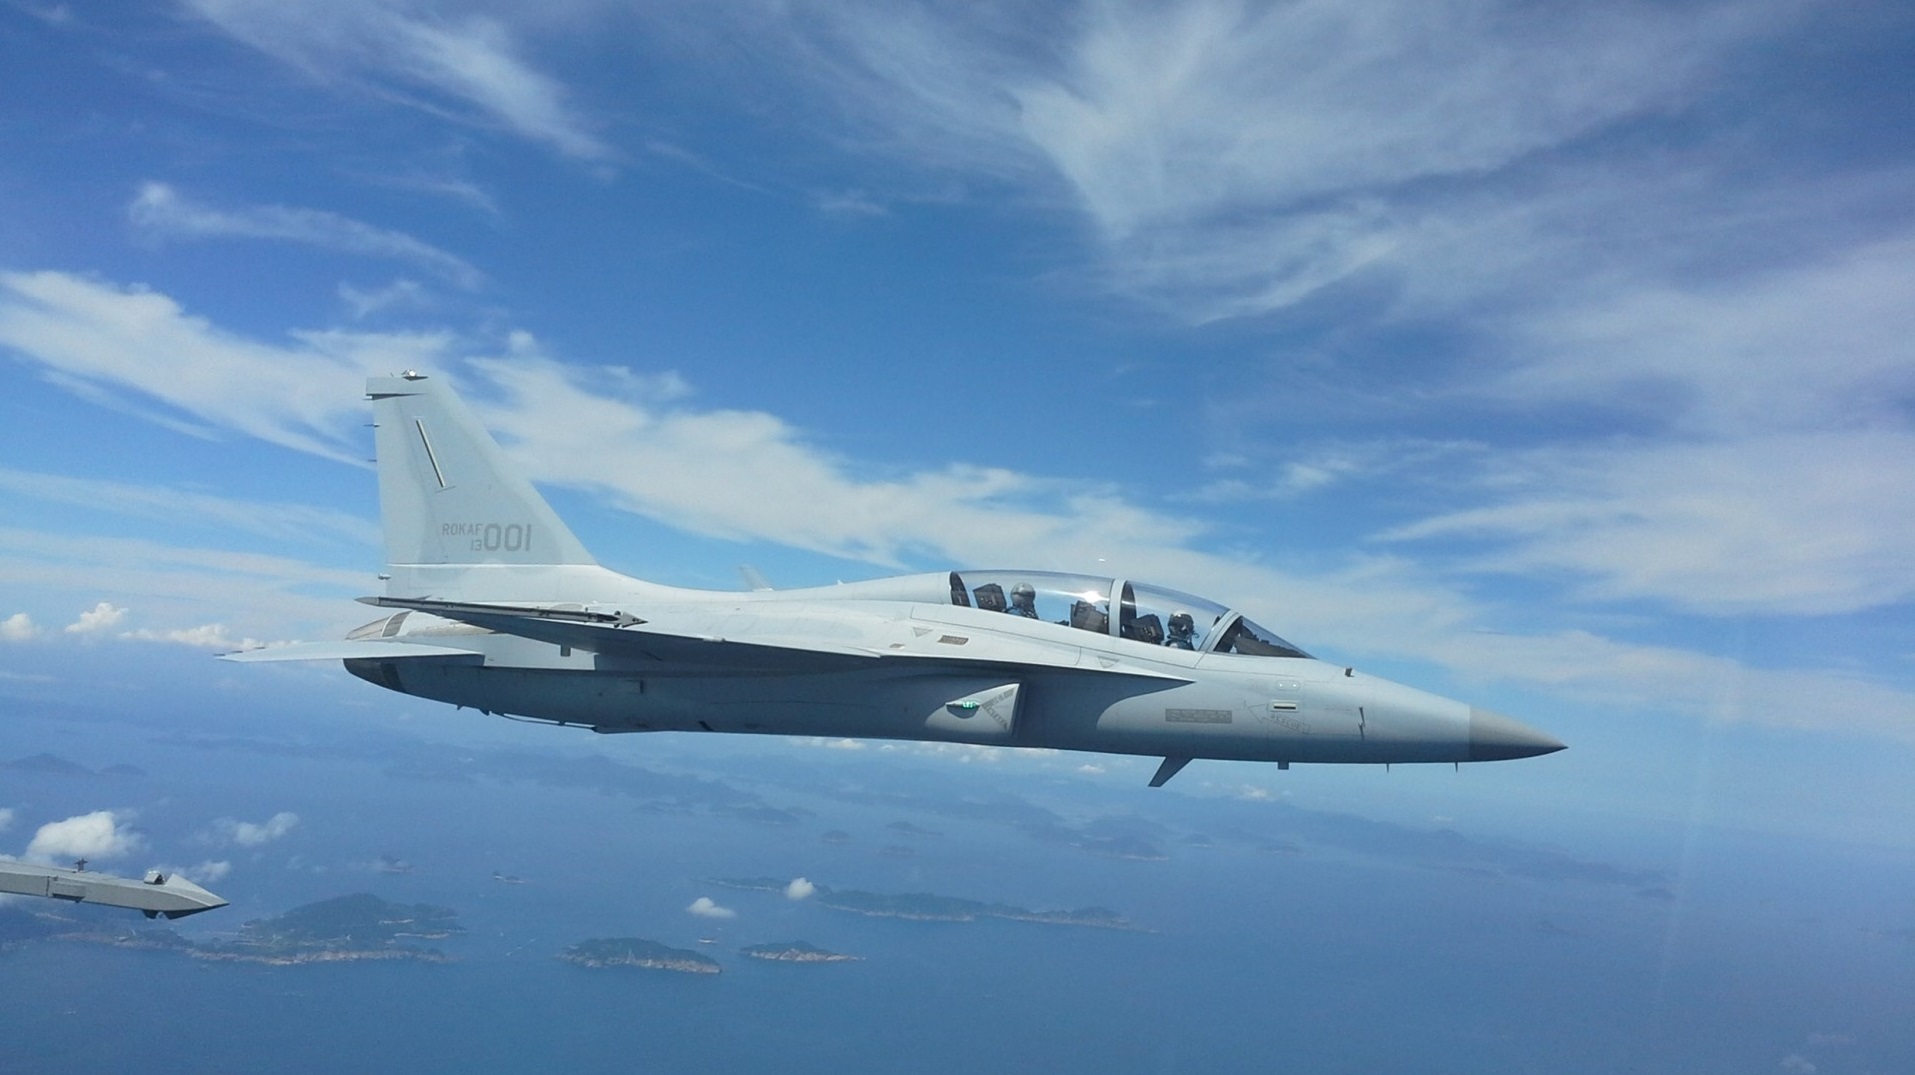 Poland will receive first South Korean FA-50 fighters under $3bn contract in summer